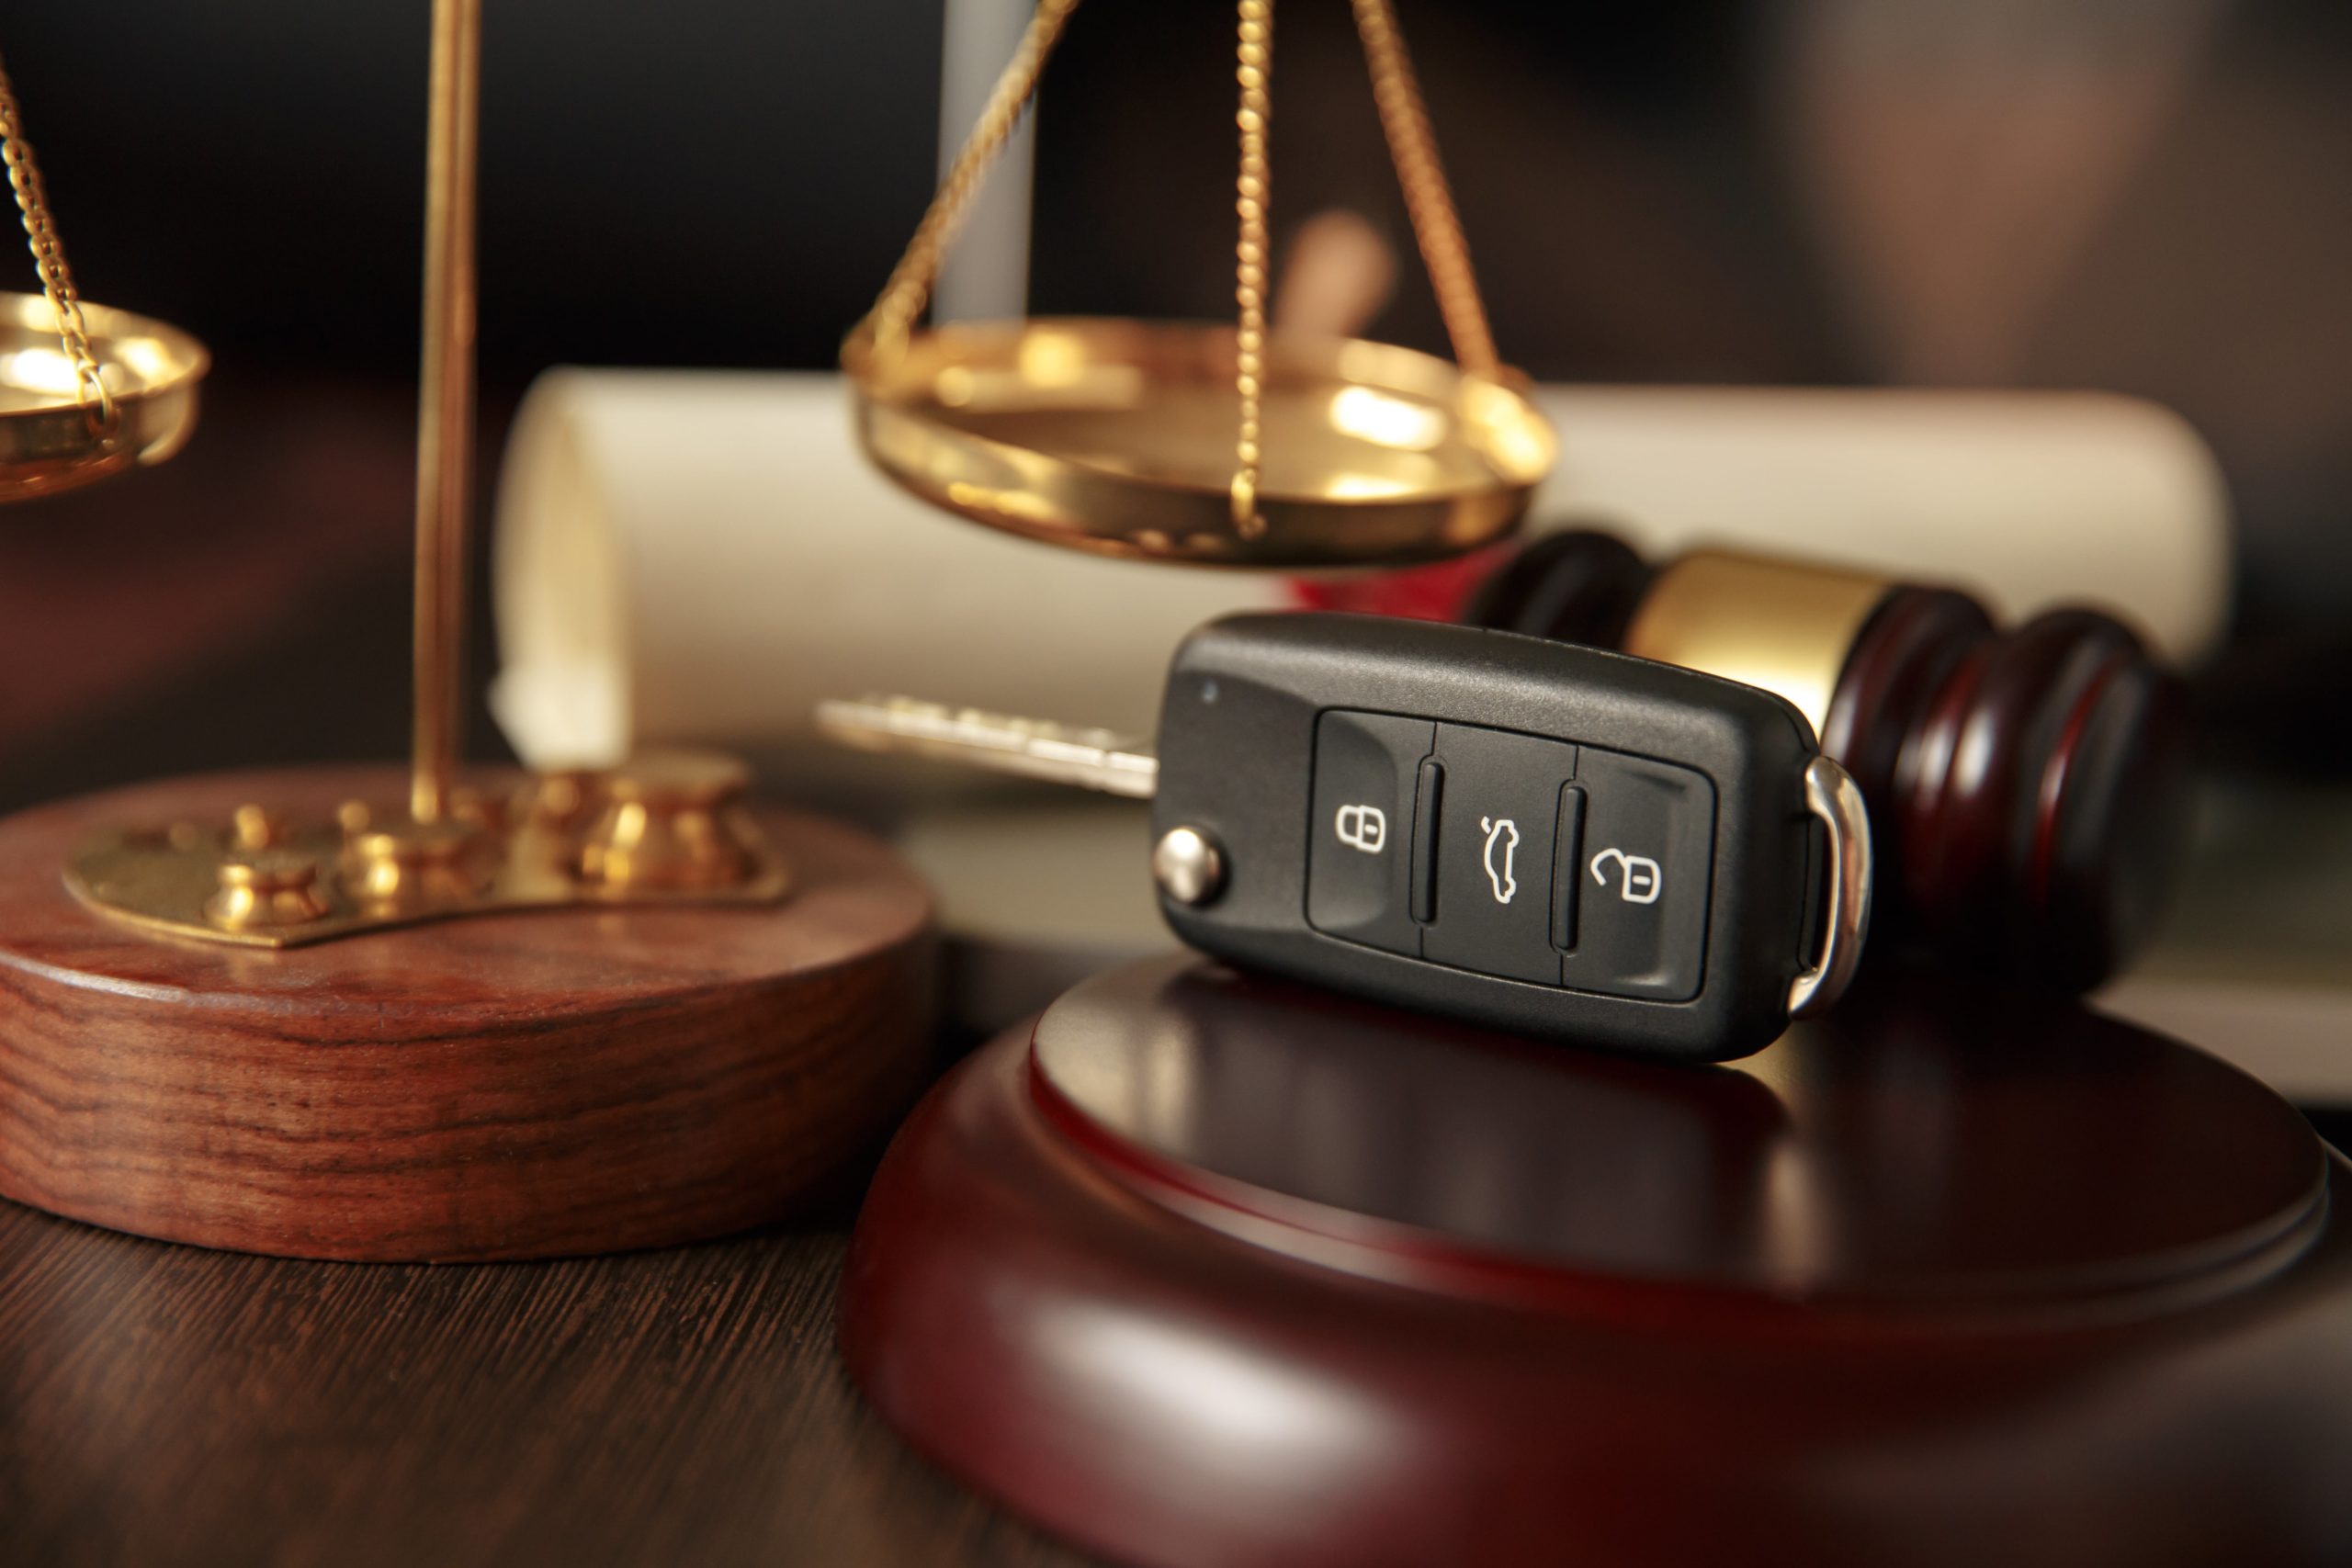 Car keys, a gavel, and the scales of justice